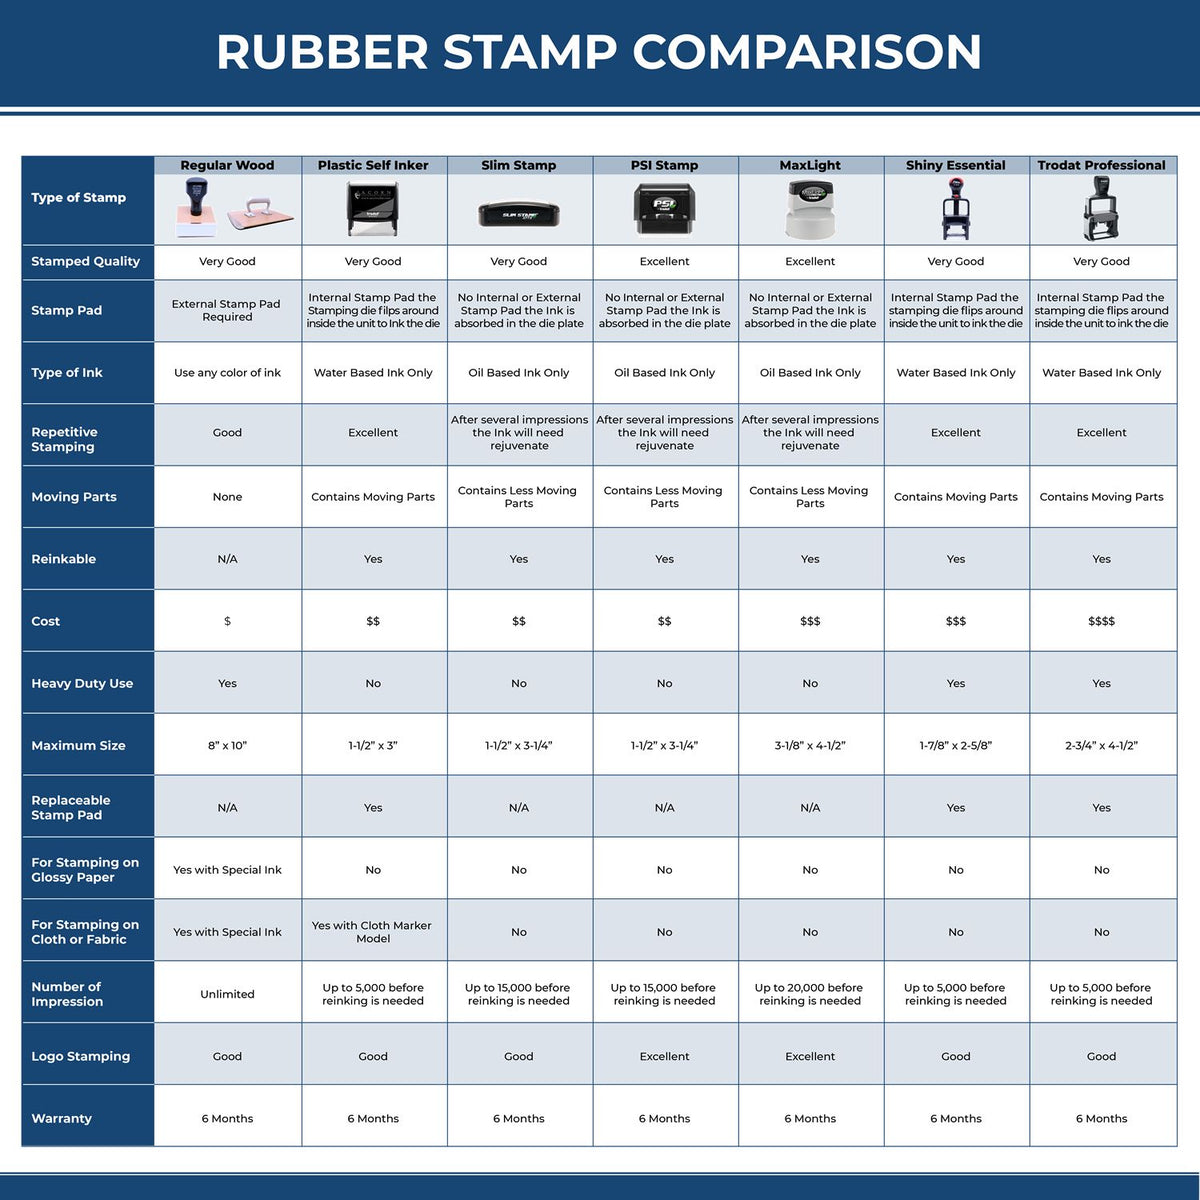 A comparison chart for the different types of mount models available for the Premium MaxLight Pre-Inked Ohio Landscape Architectural Stamp.